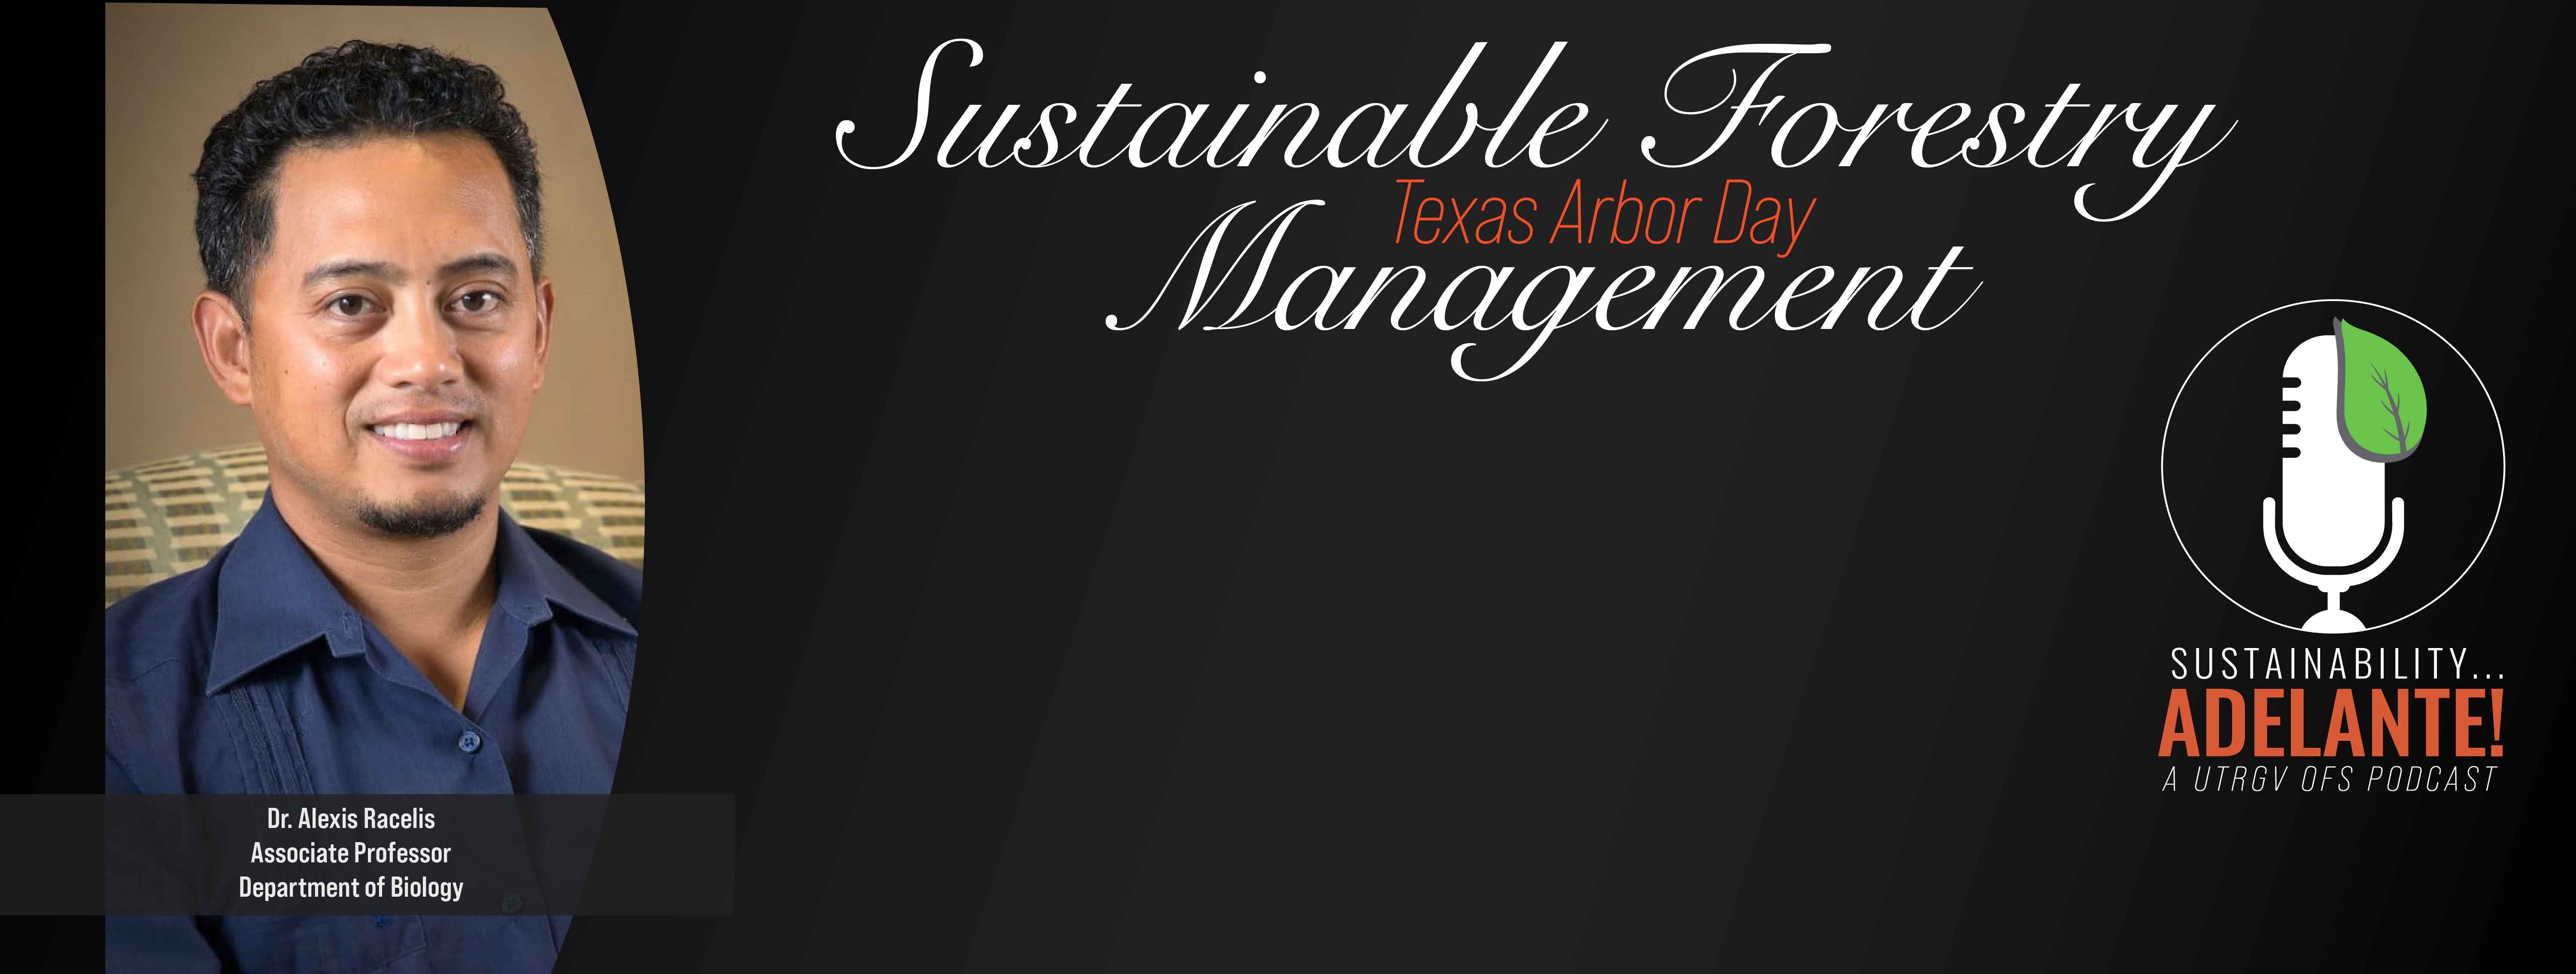 Sustainable Forestry Texas Arbor Day Management Dr. Racelis Assistant Professor Department of Biology Sustainability Adelante! A UTRGV OFS Podcast